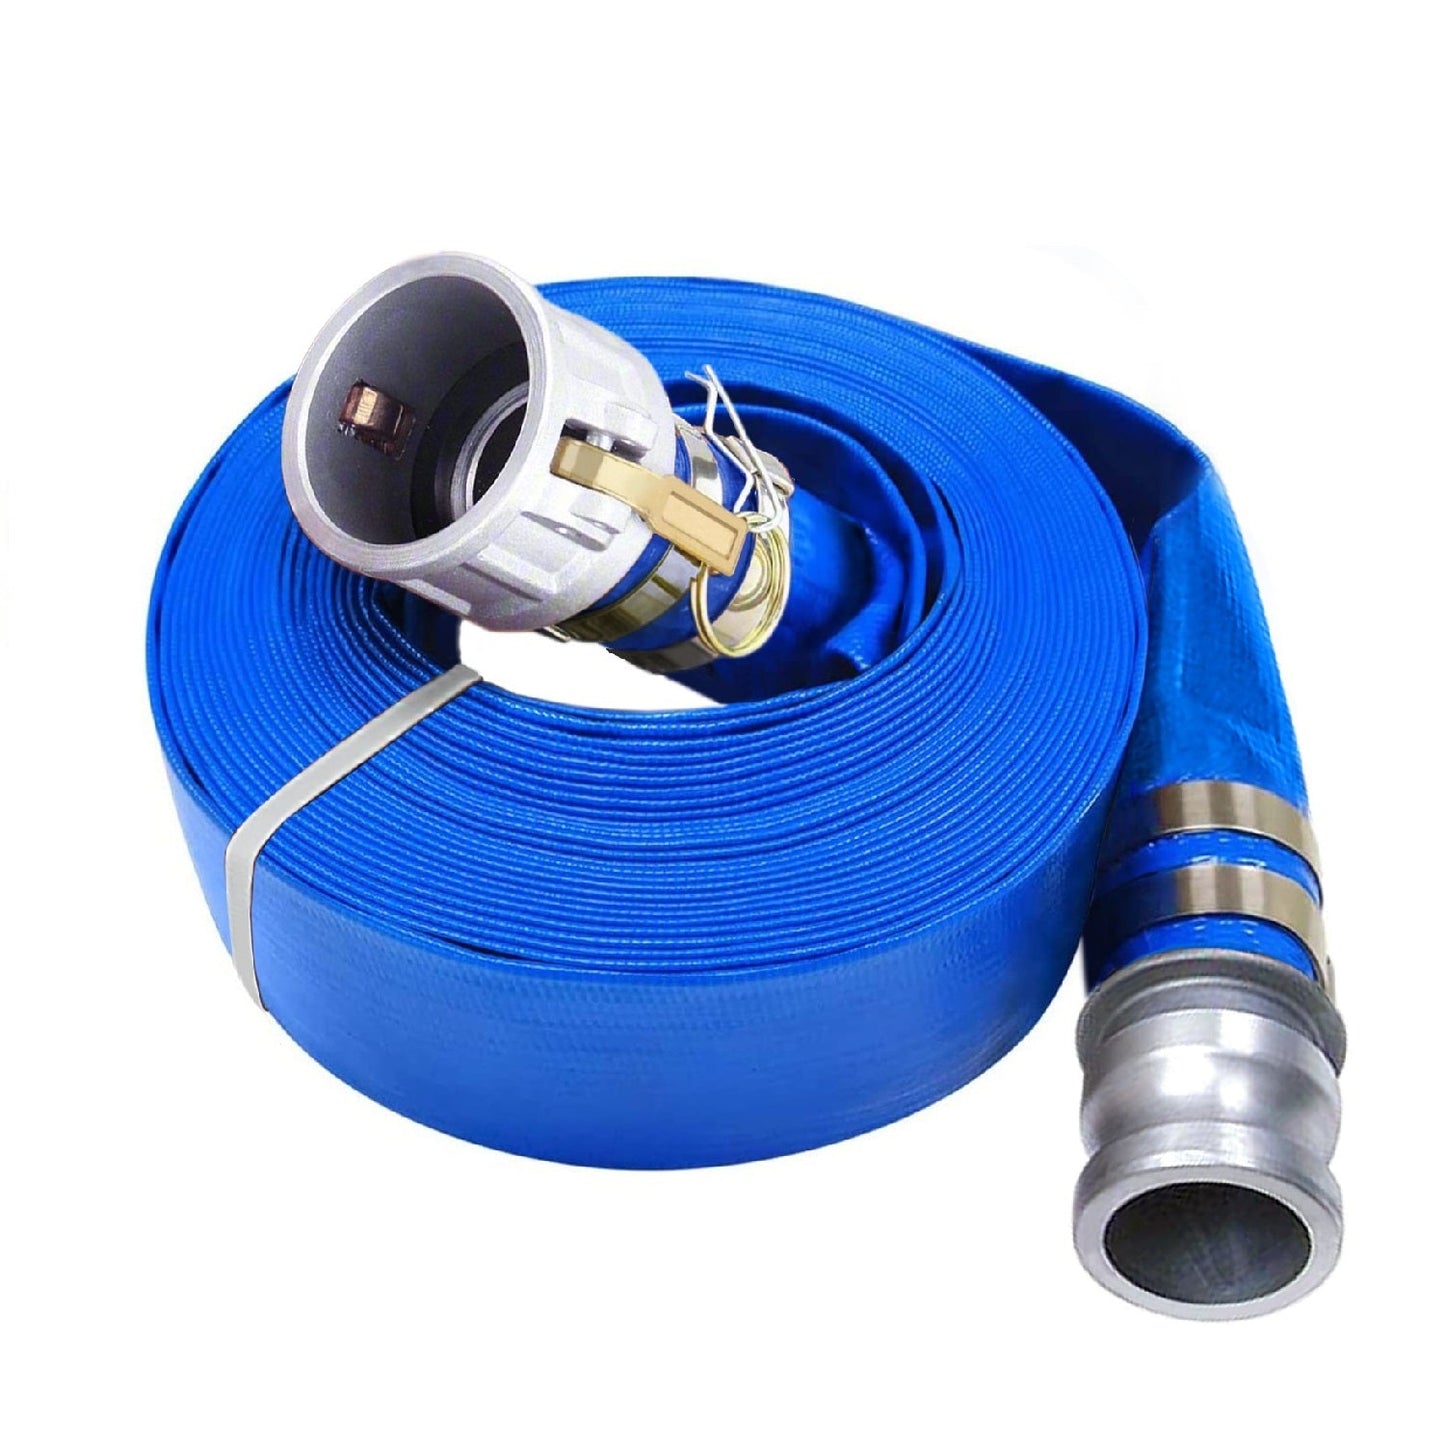 Foresee PVC 20 FT Suction Hose, 50 FT Discharge Hose, and Strainer Kit with Camlock Type C and MNPT Couplings